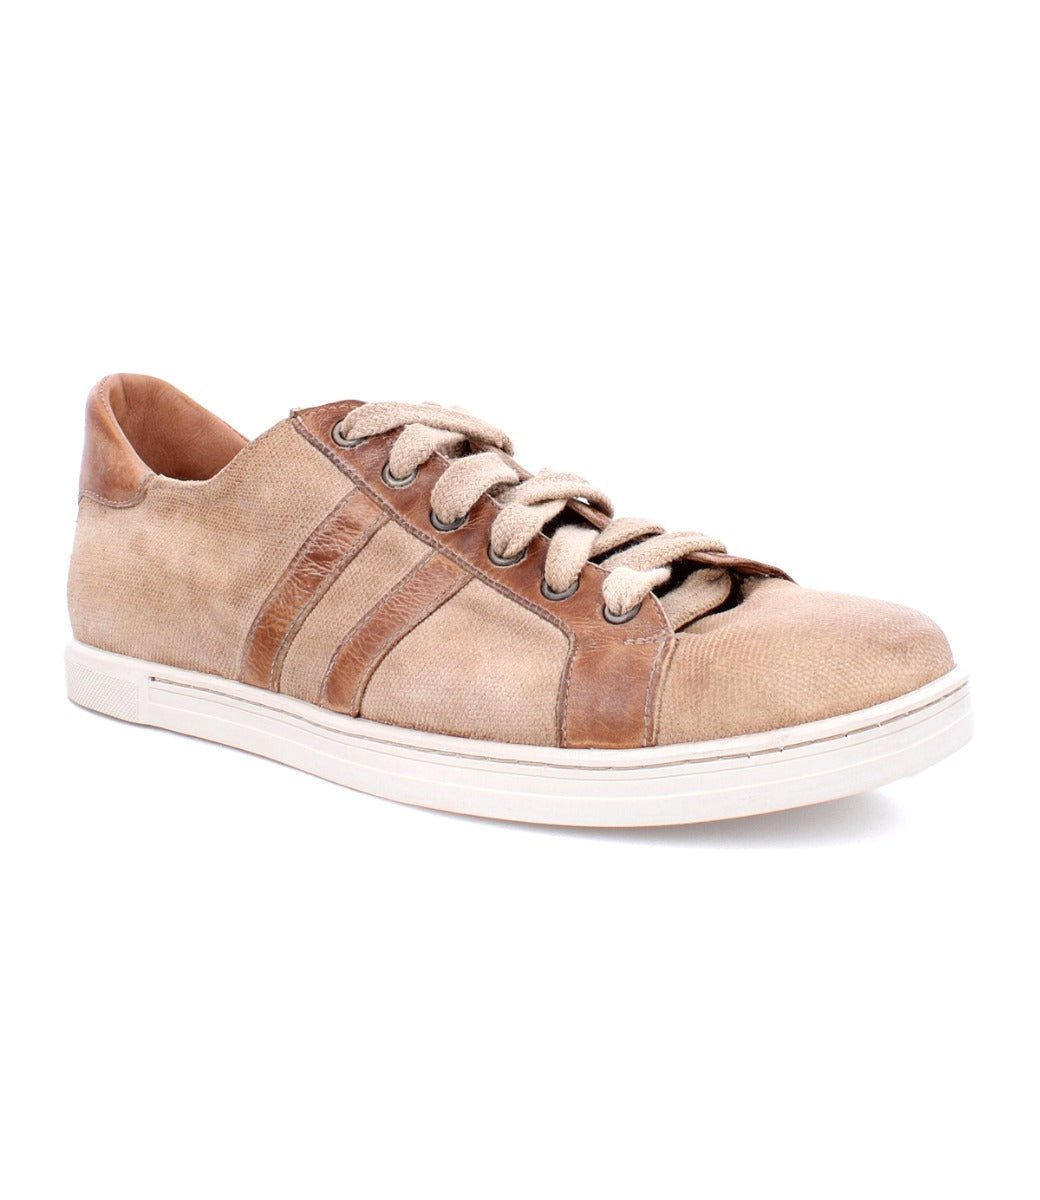 A men's tan and brown Lighthouse sneaker with laces by Bed Stu.